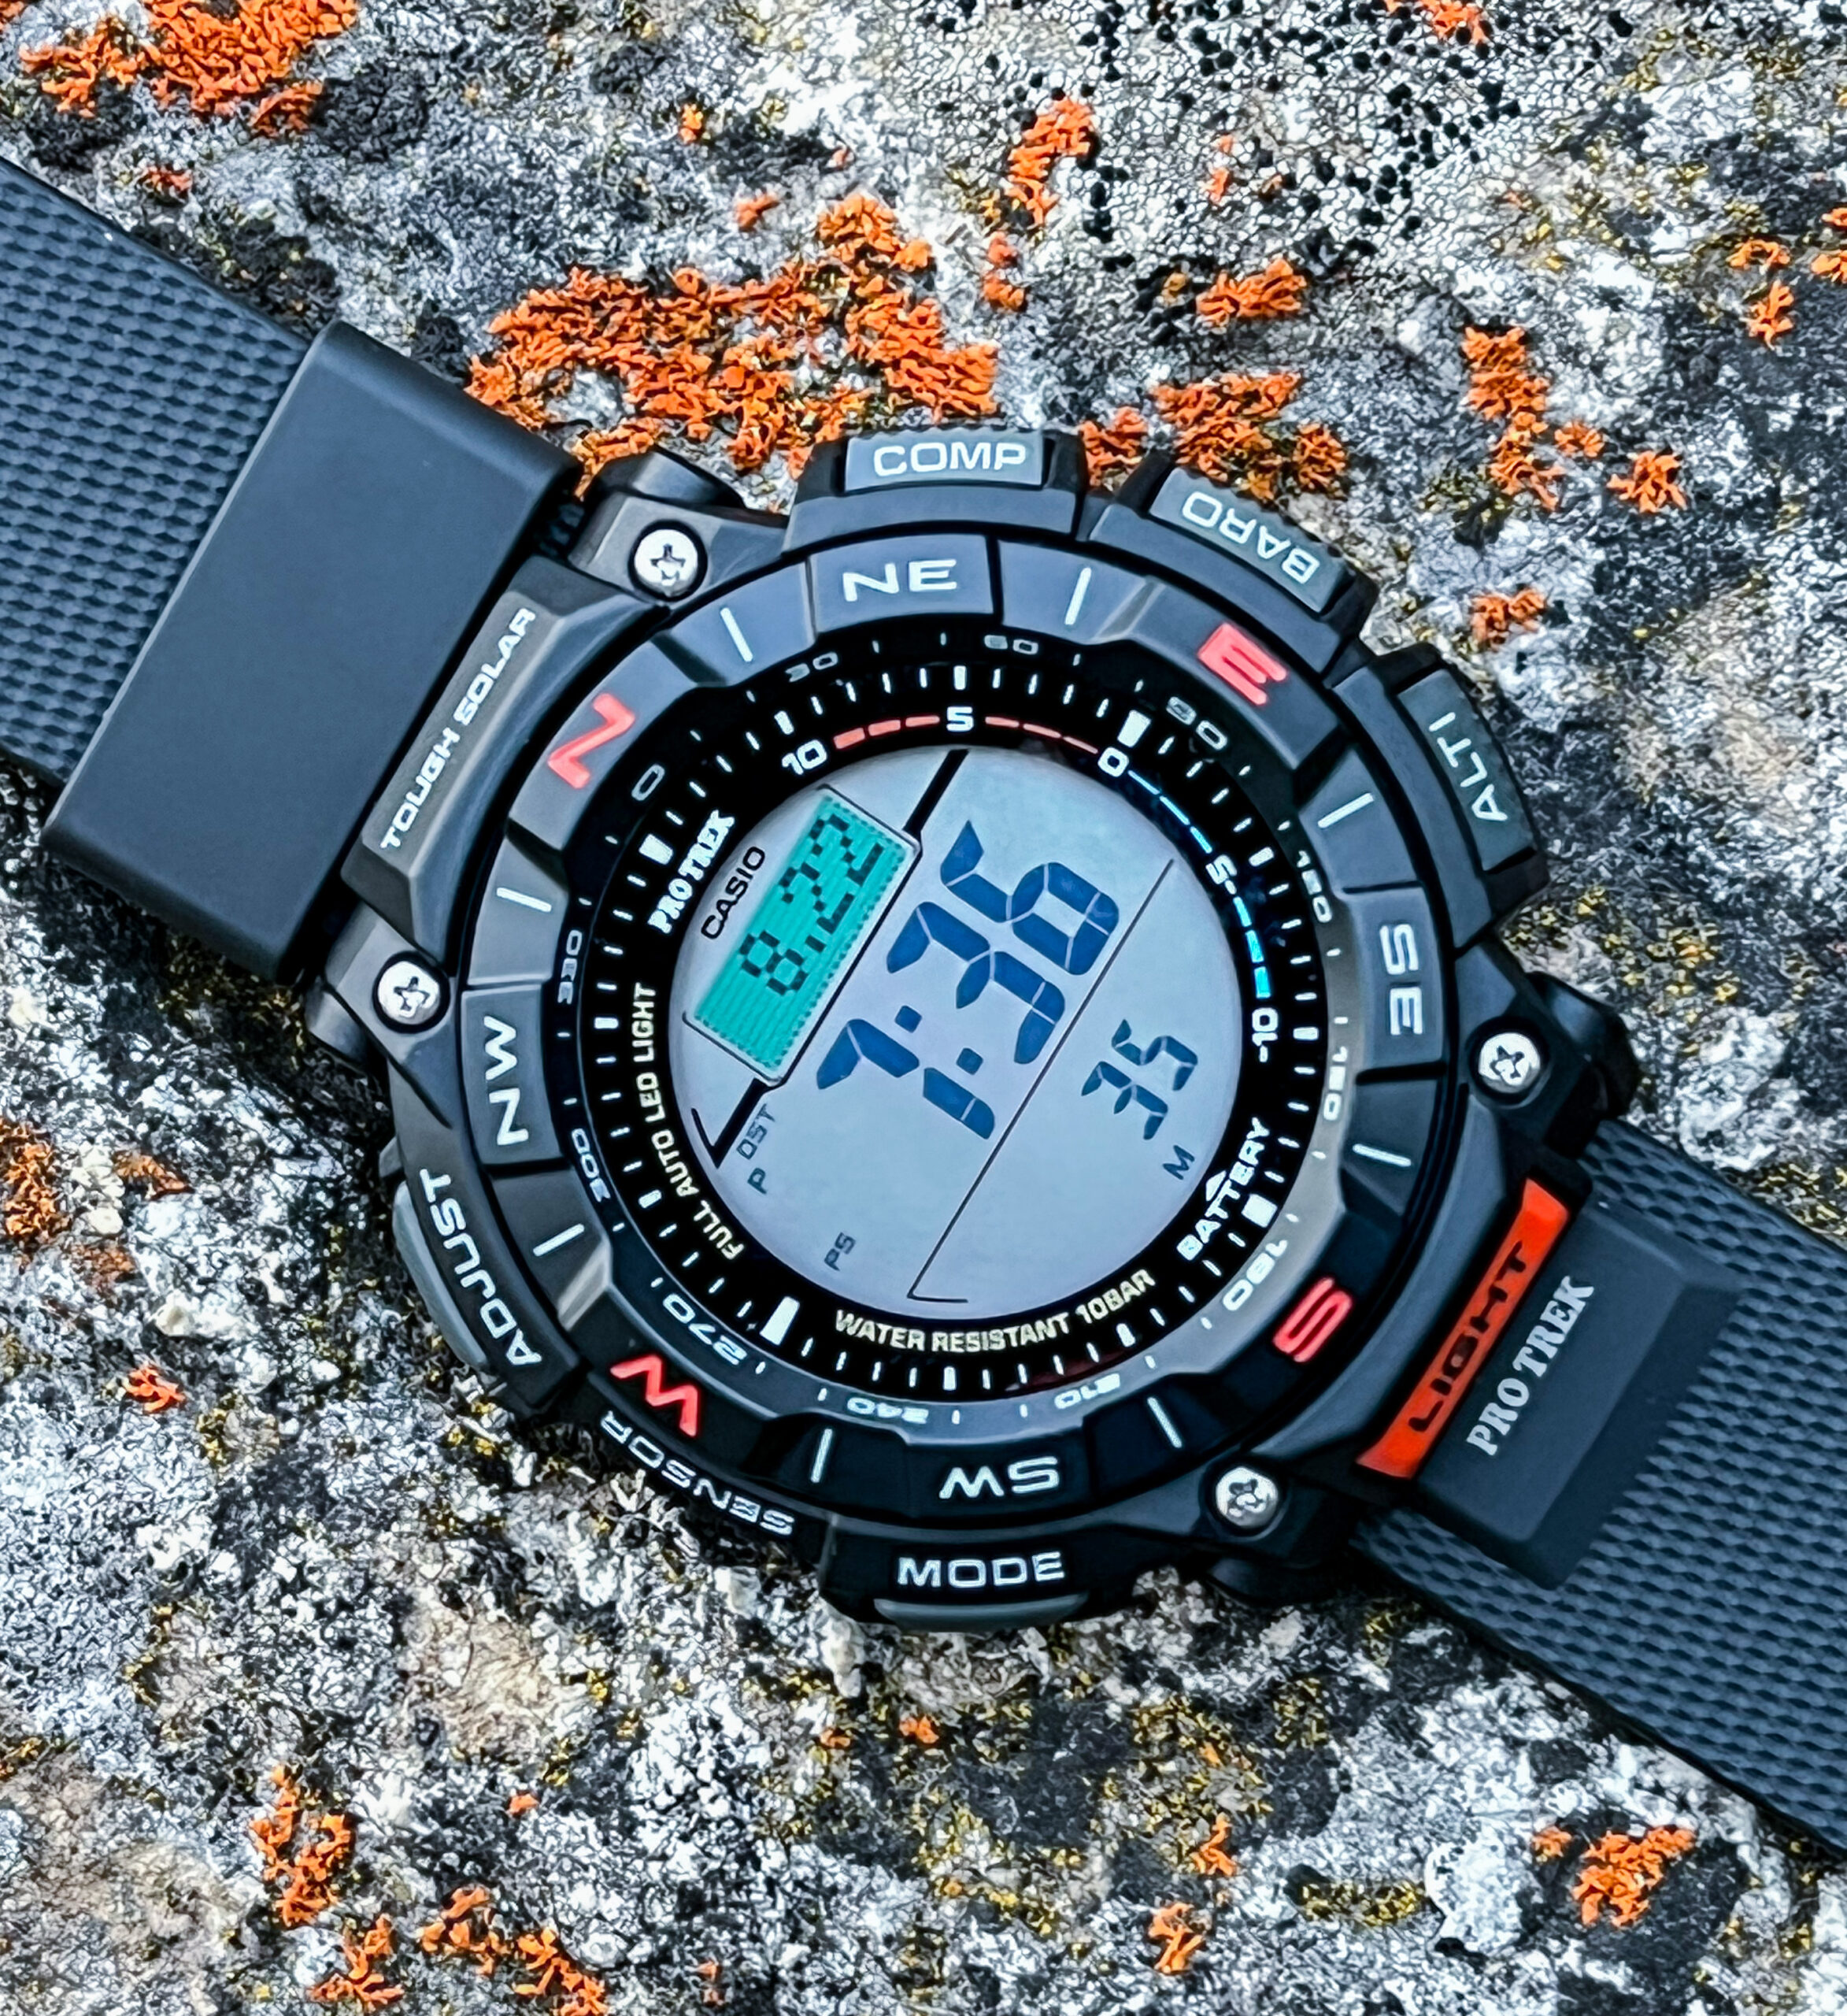 Casio ProTrek PRG340-1 Review: A Super-Spy Watch for the Rest of Us